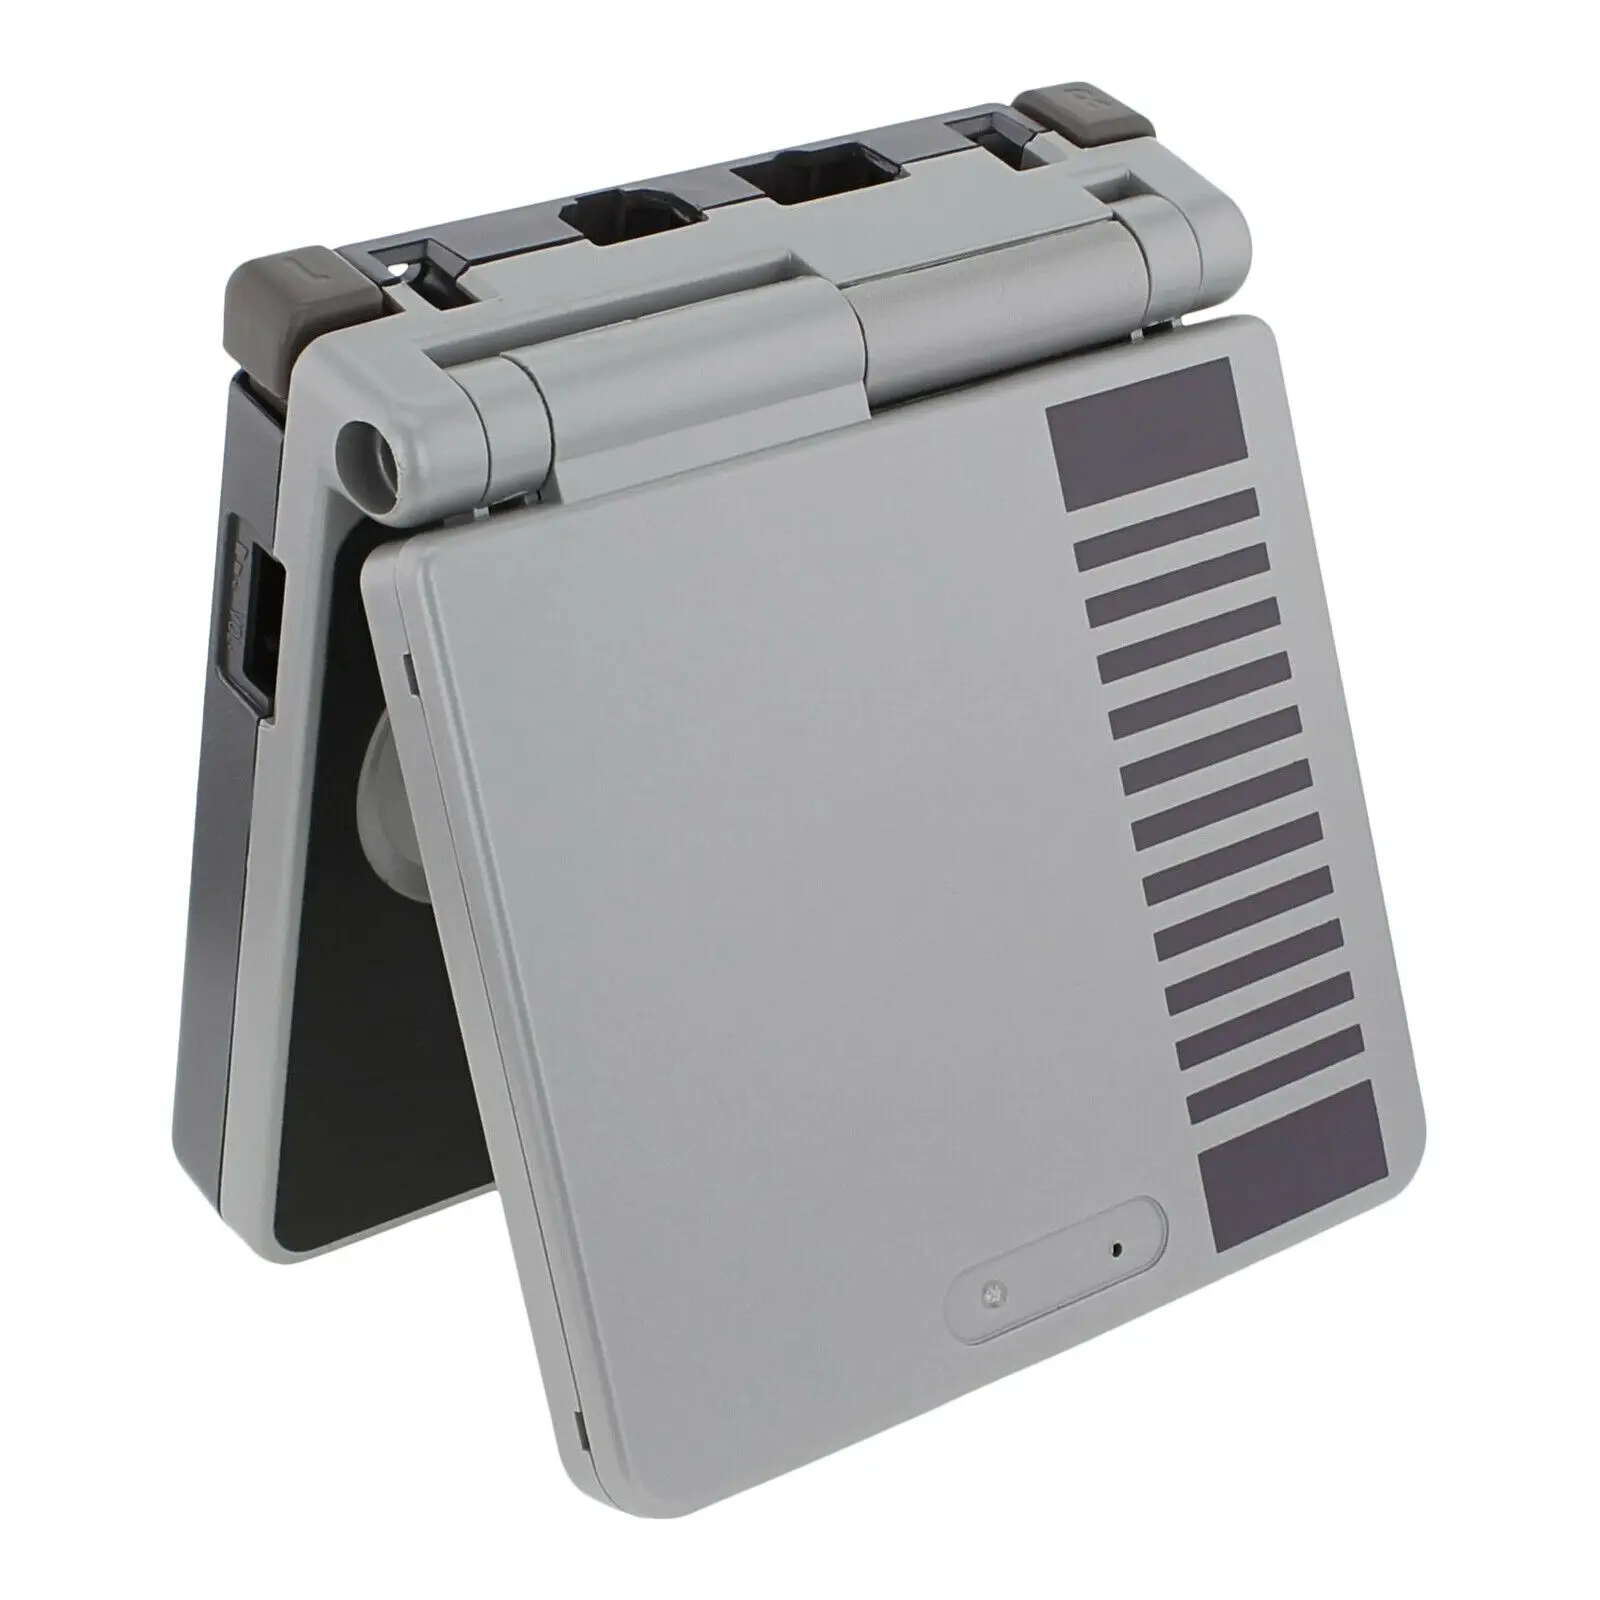 

For GBA SP Shell for GameBoy Advance SP Replacement Case Casing Shell Housing